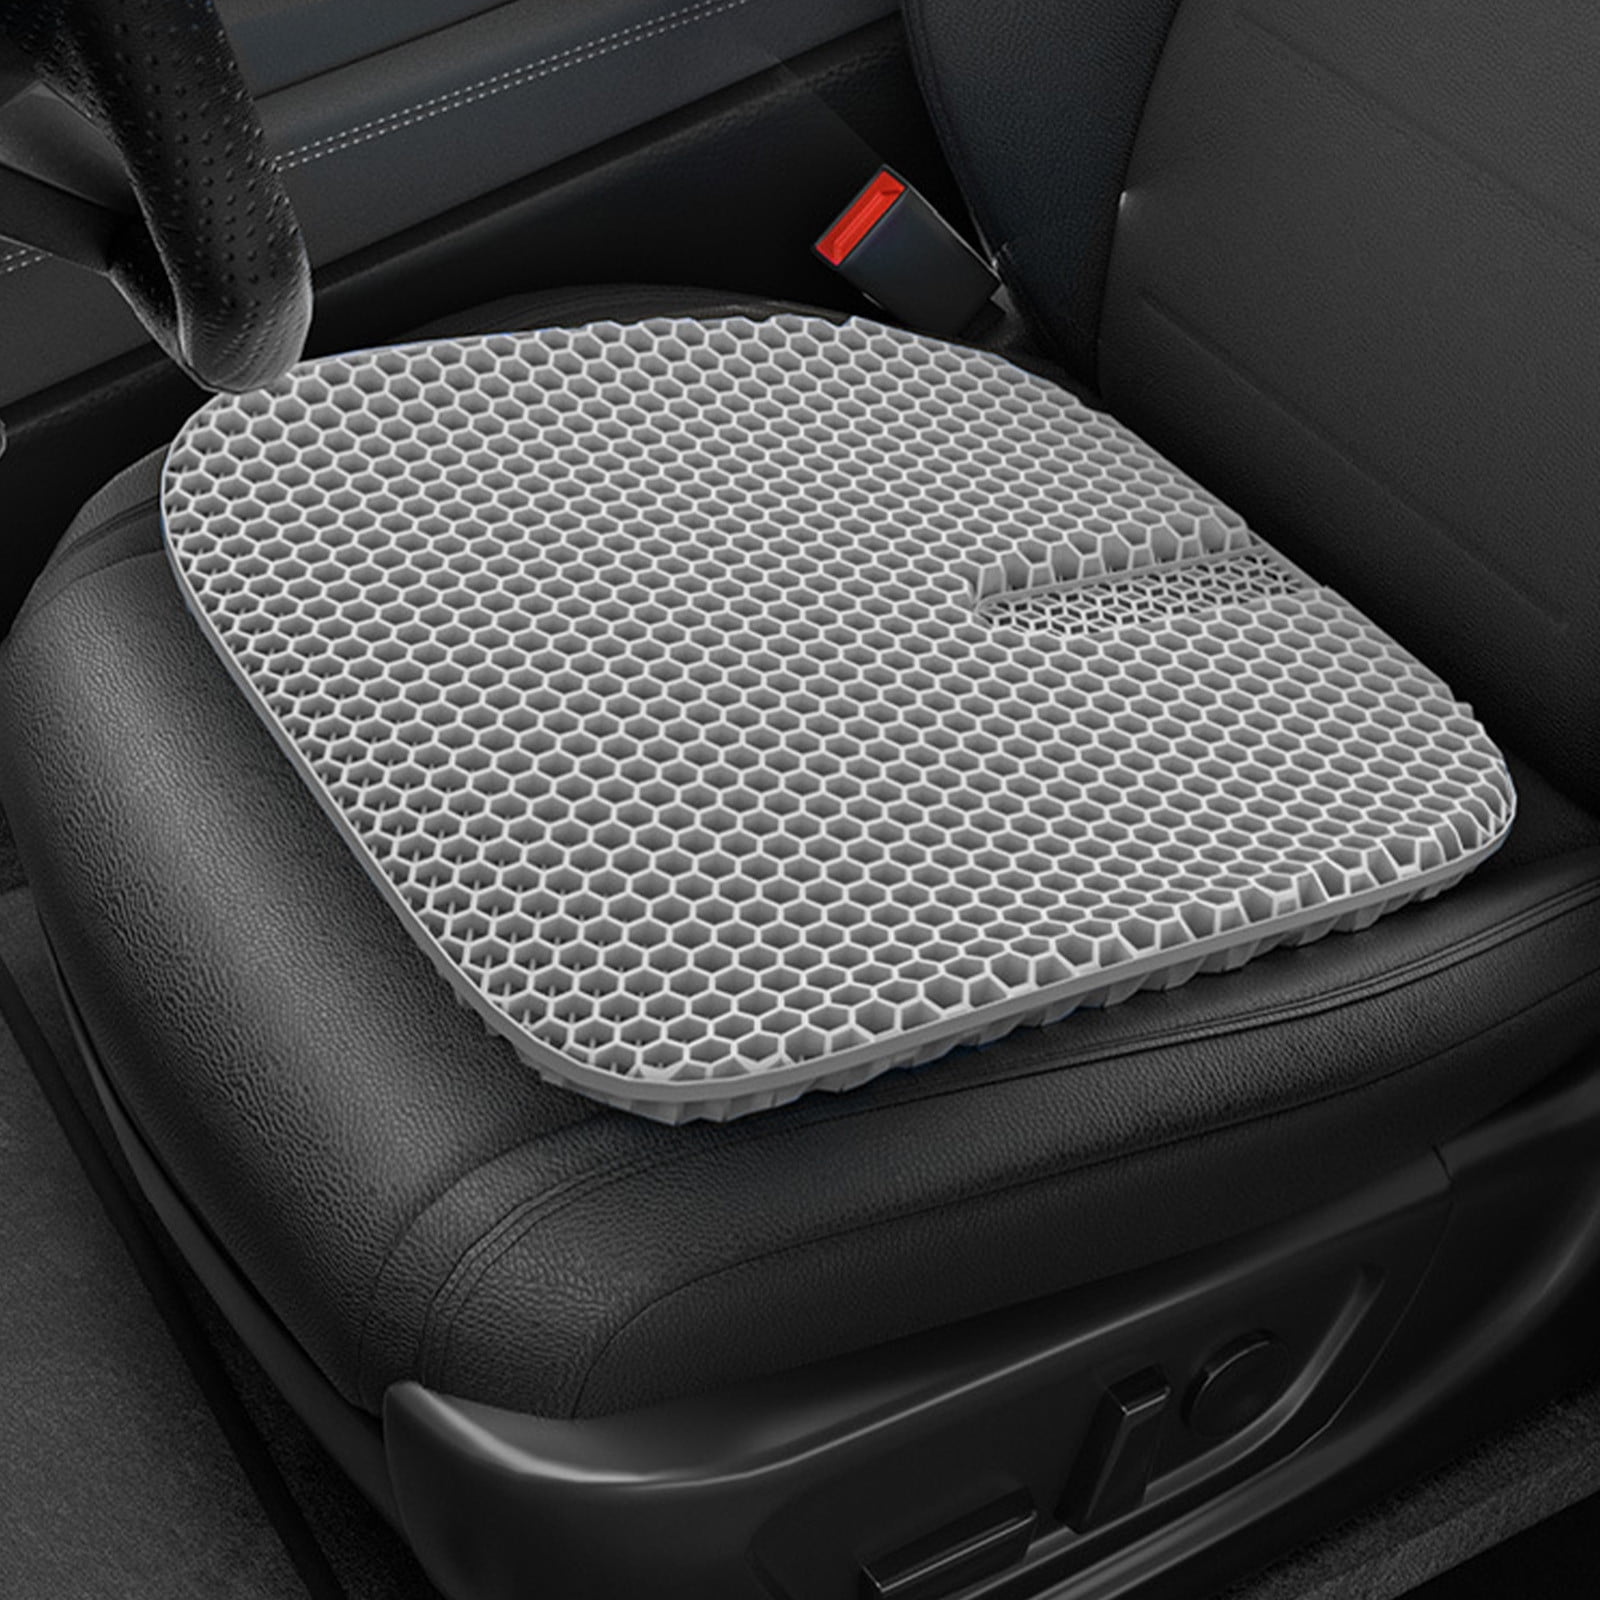 Gel Seat Cushion, Cooling seat Cushion Thick Big Breathable Honeycomb  Design Absorbs Pressure Points Seat Cushion with Non-Slip Cover Gel Cushion  for Office Chair Home Car Seat Cushion for Wheelchair 